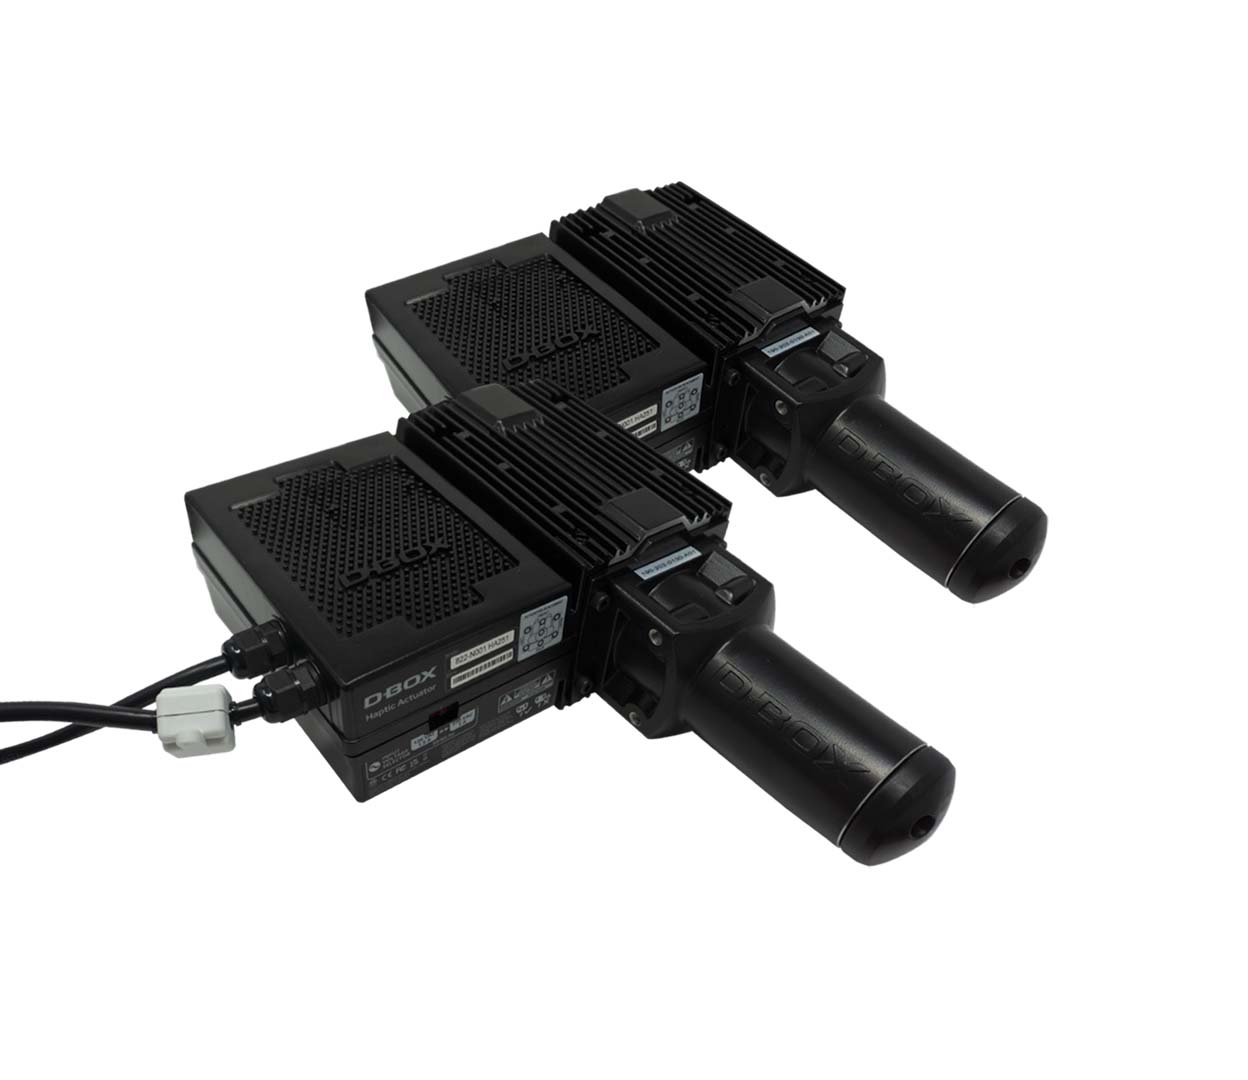 Motion System with 2 motors/actuators and Motion Sim Base